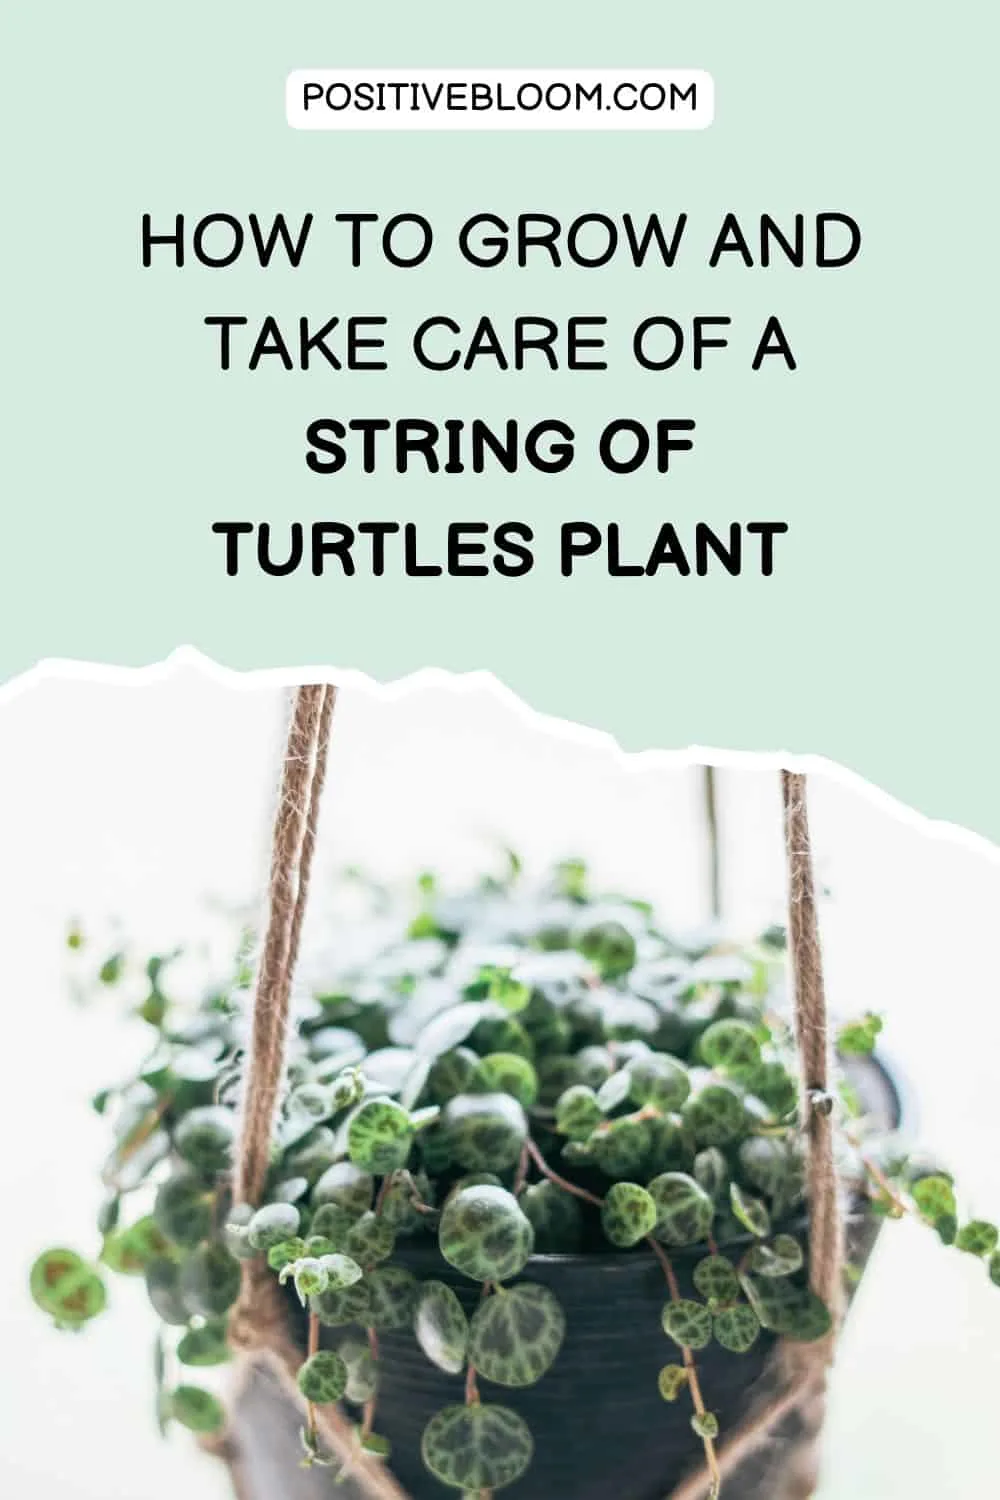 How To Grow And Take Care Of A String Of Turtles Plant Pinterest